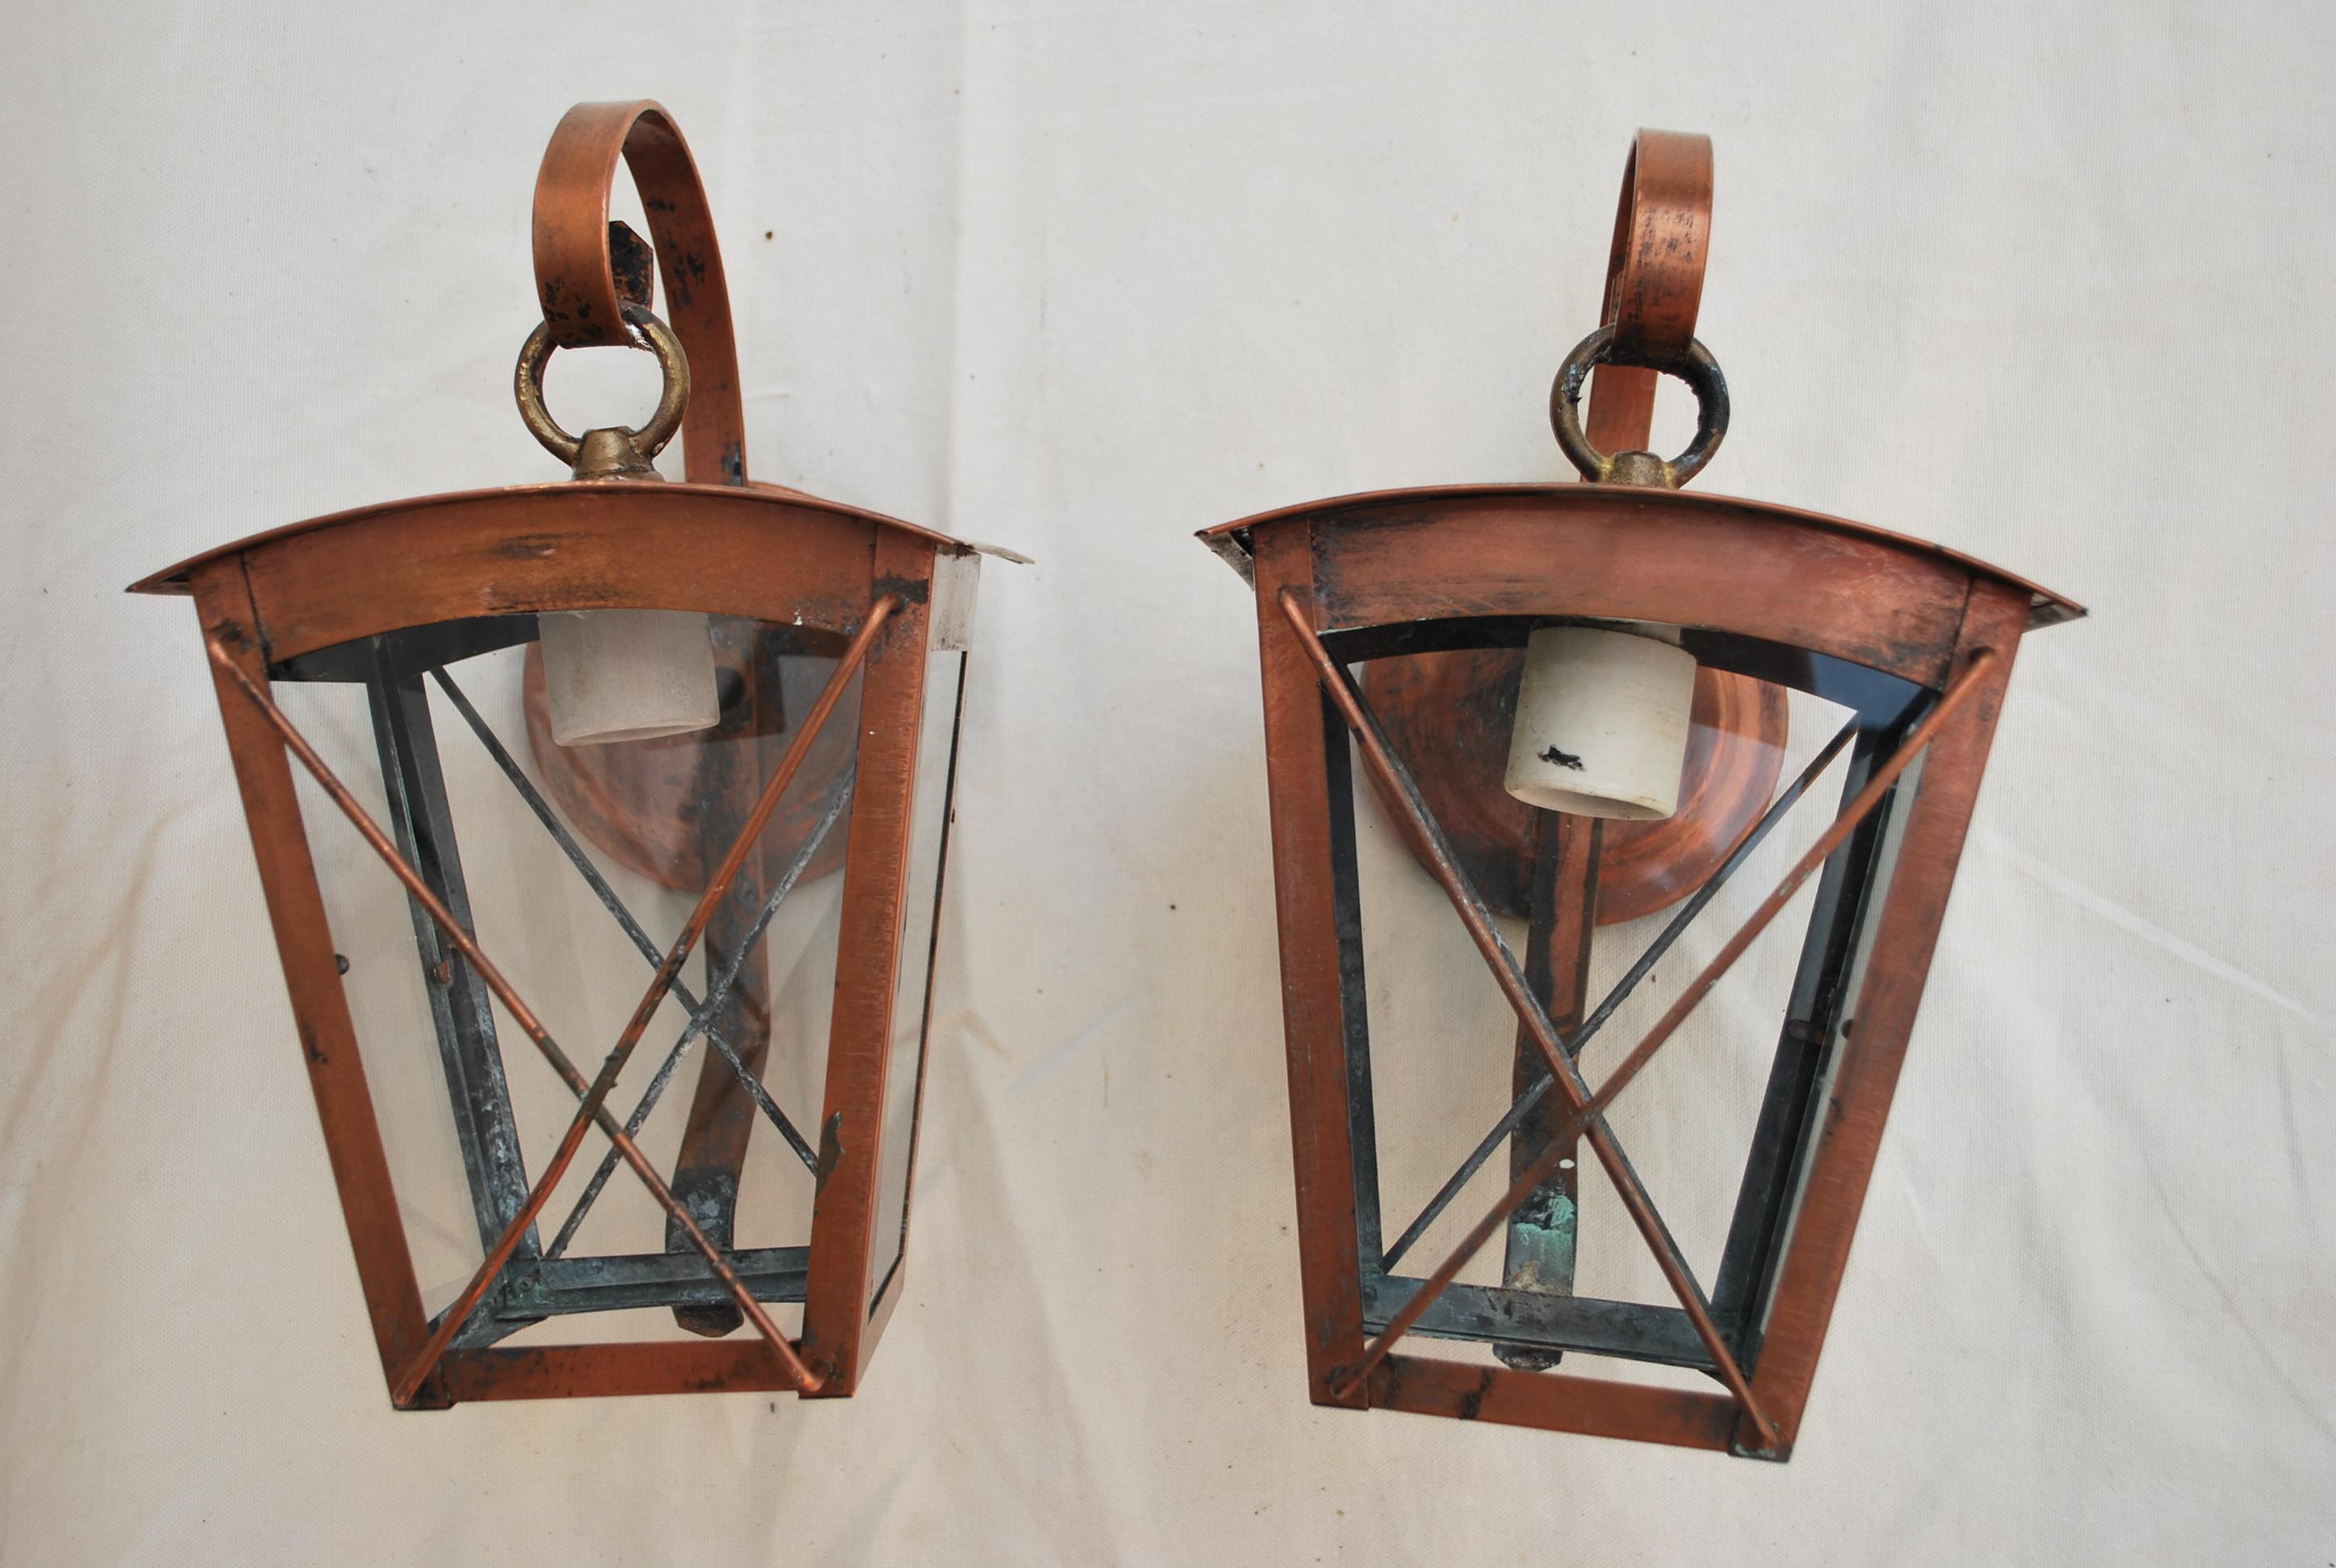 A very nice pair of 1940s copper outdoor or indoor sconces, they have been stripped , they had so many coats of paint when we find them, one winter and the copper will have a beautiful patina.